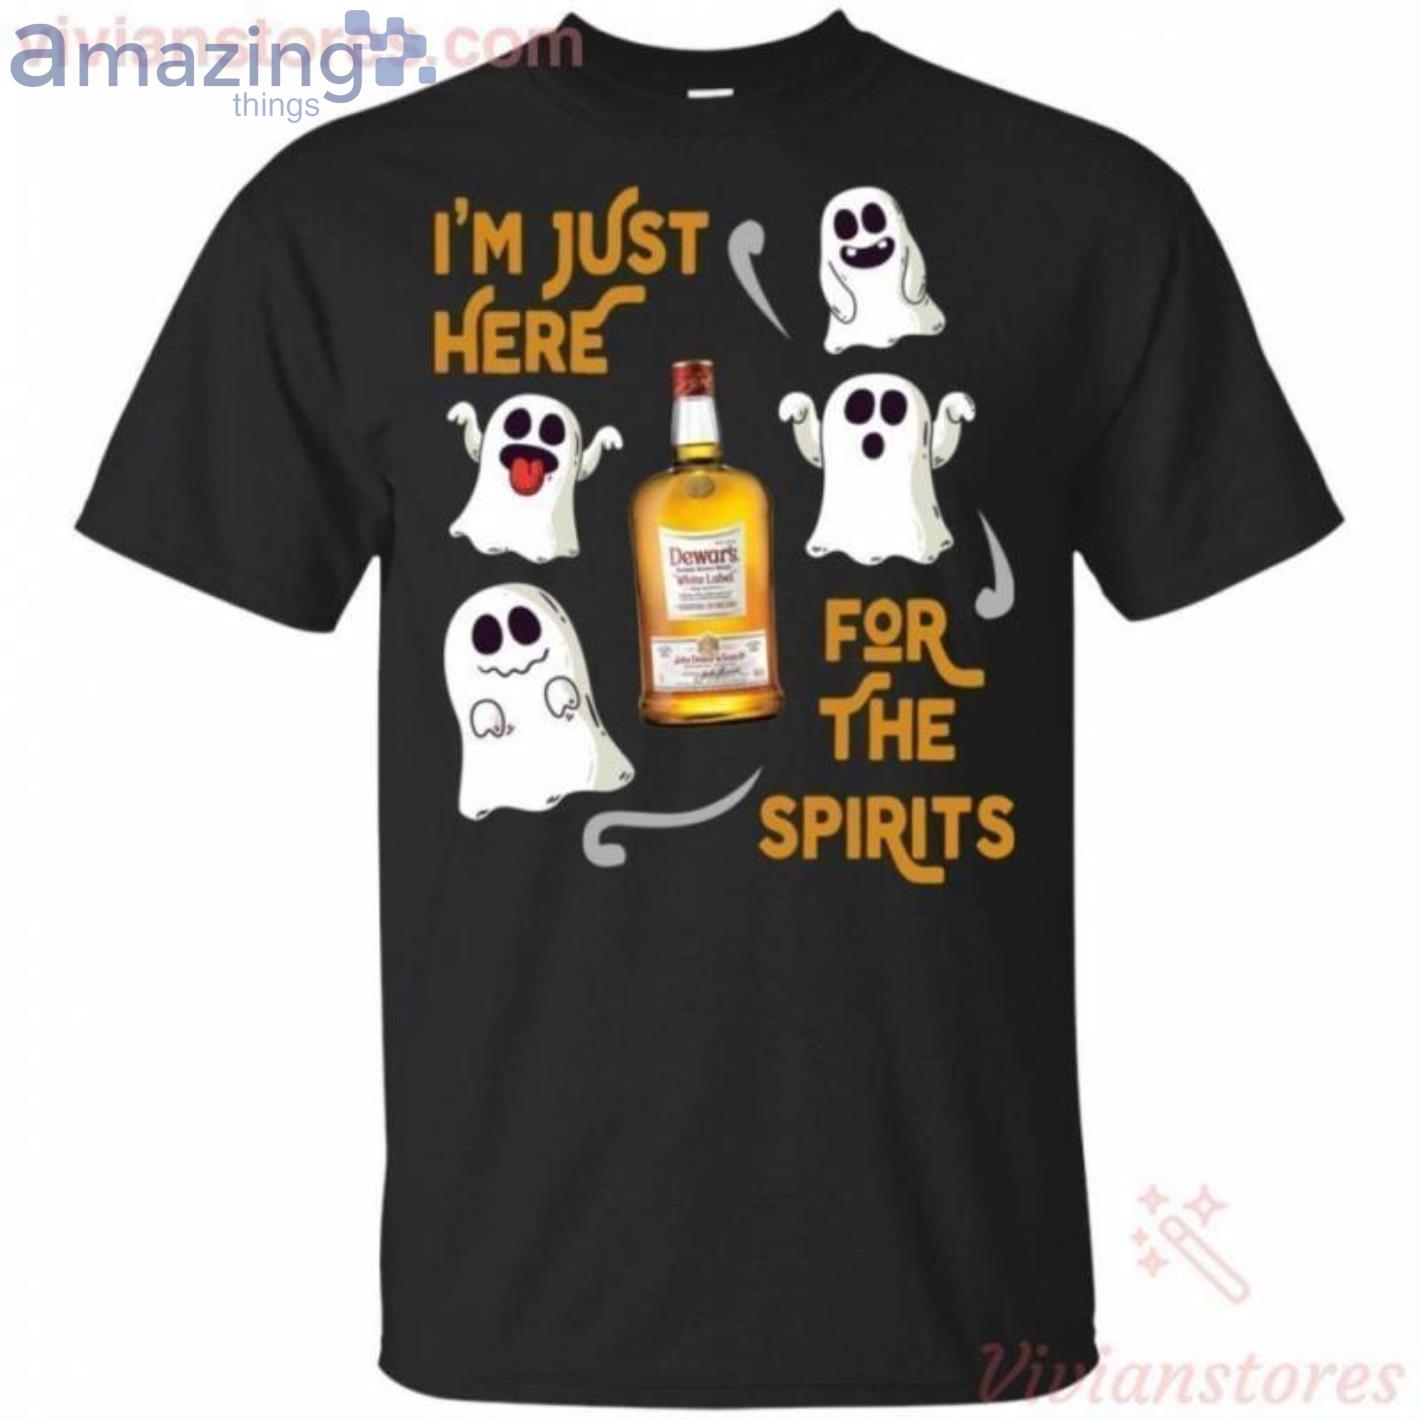 I'm Just Here For The Spirits Dewar's Scotch Whisky Halloween T-Shirt Product Photo 1